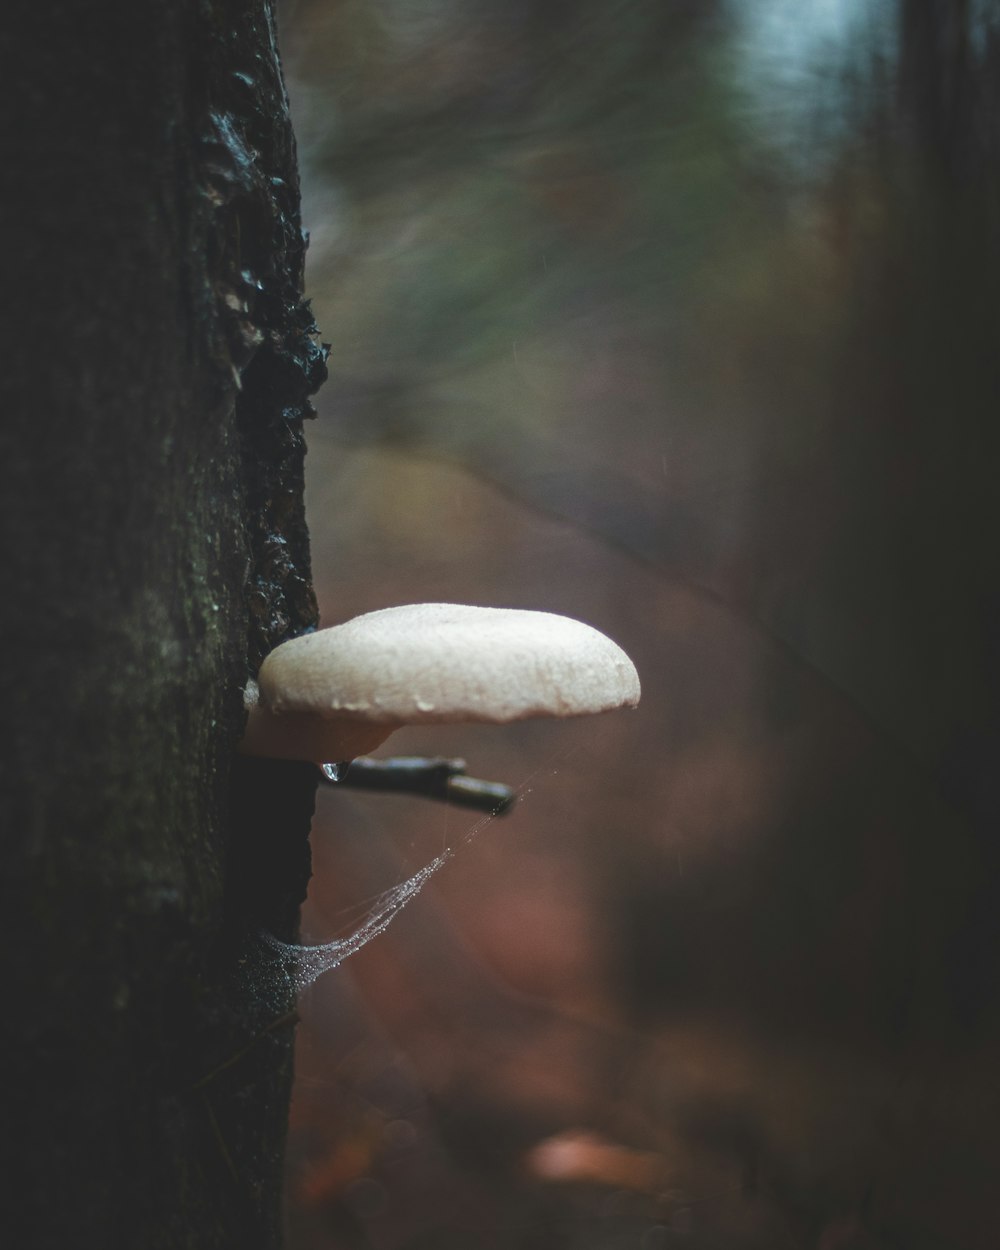 a mushroom growing out of a tree